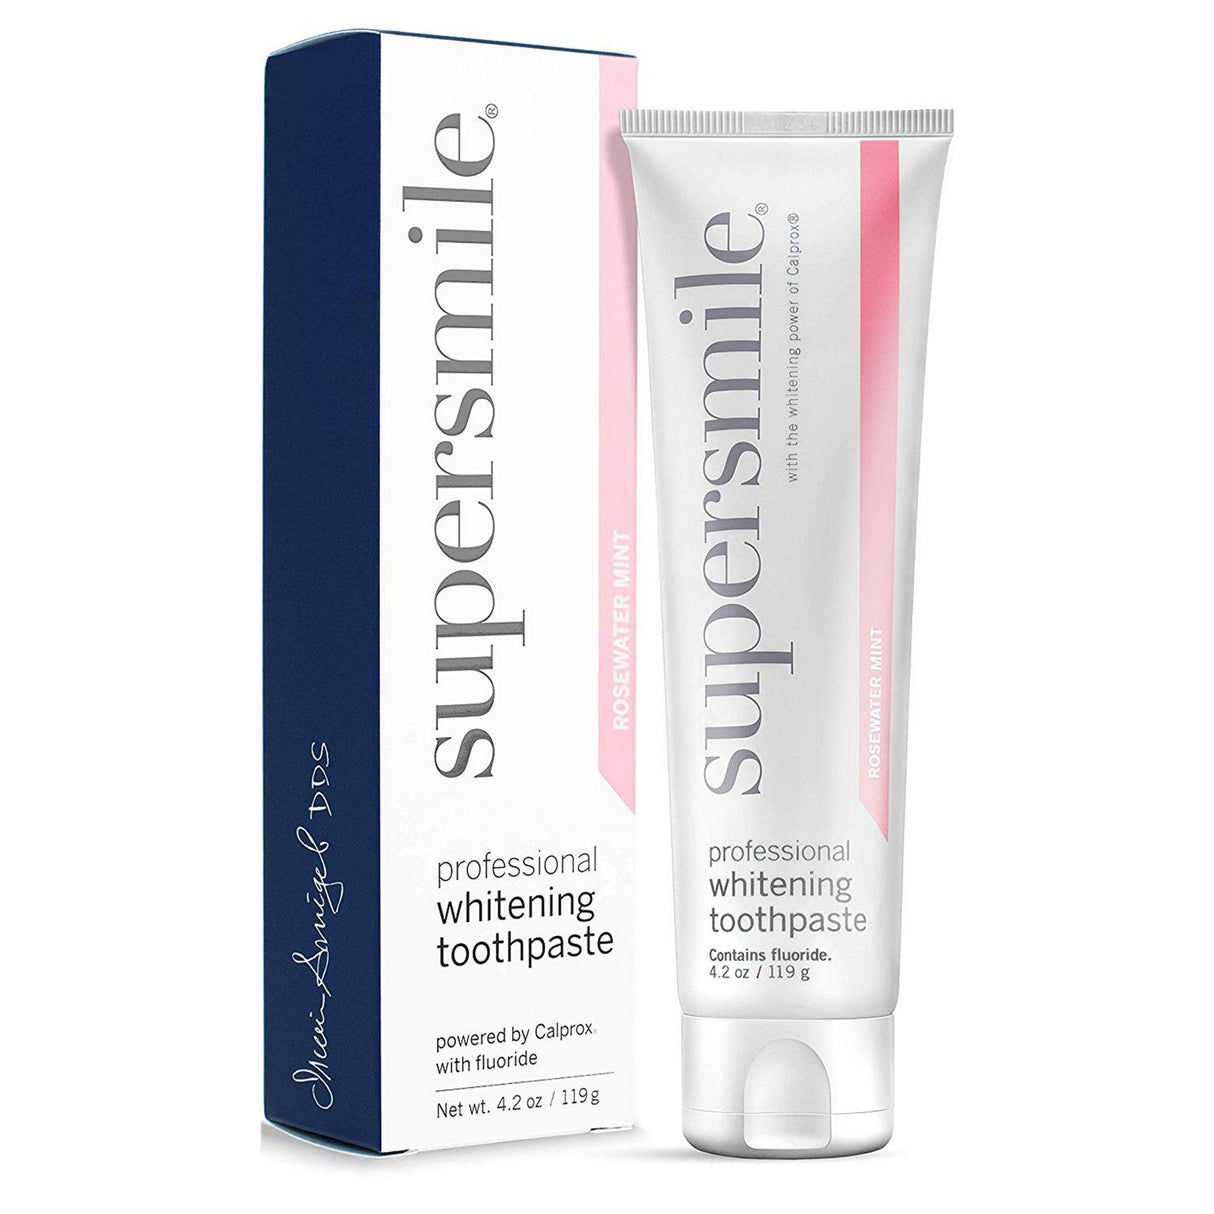 Supersmile Whitening Toothpaste (Rosewater Mint) 119g Supersmile 